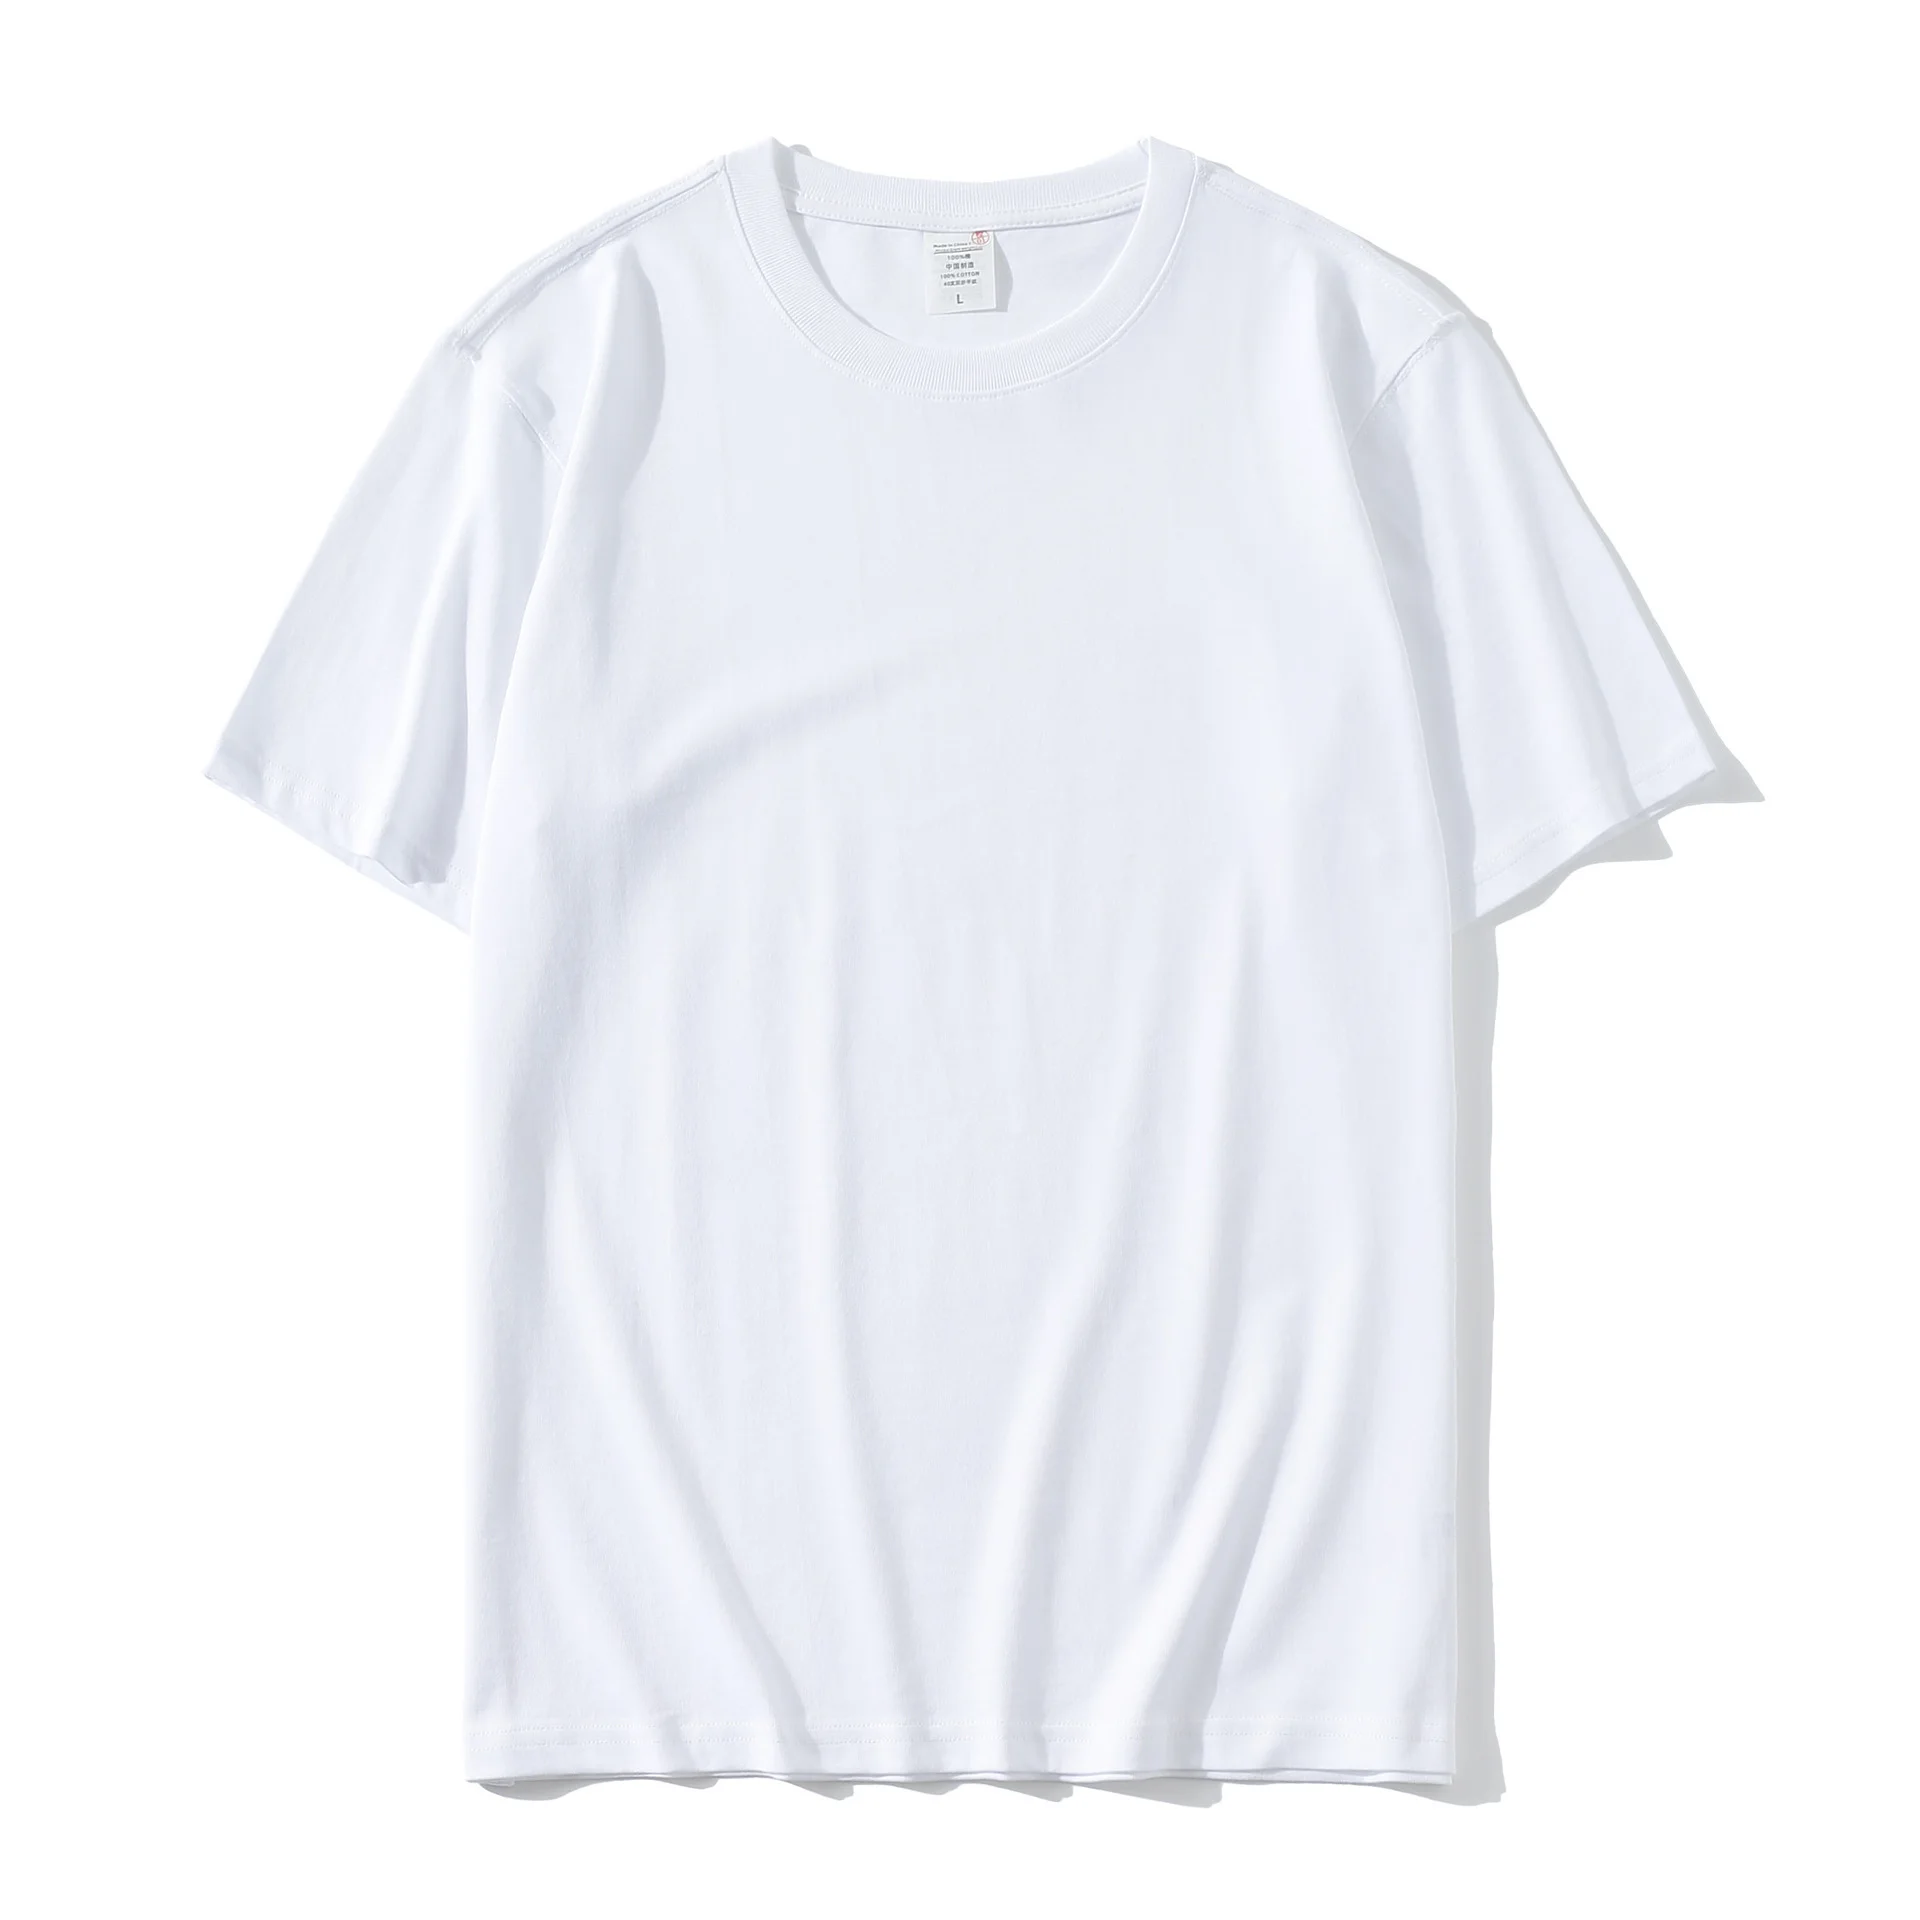 Wholesale Blank T shirts for Printing in Prince Edward County